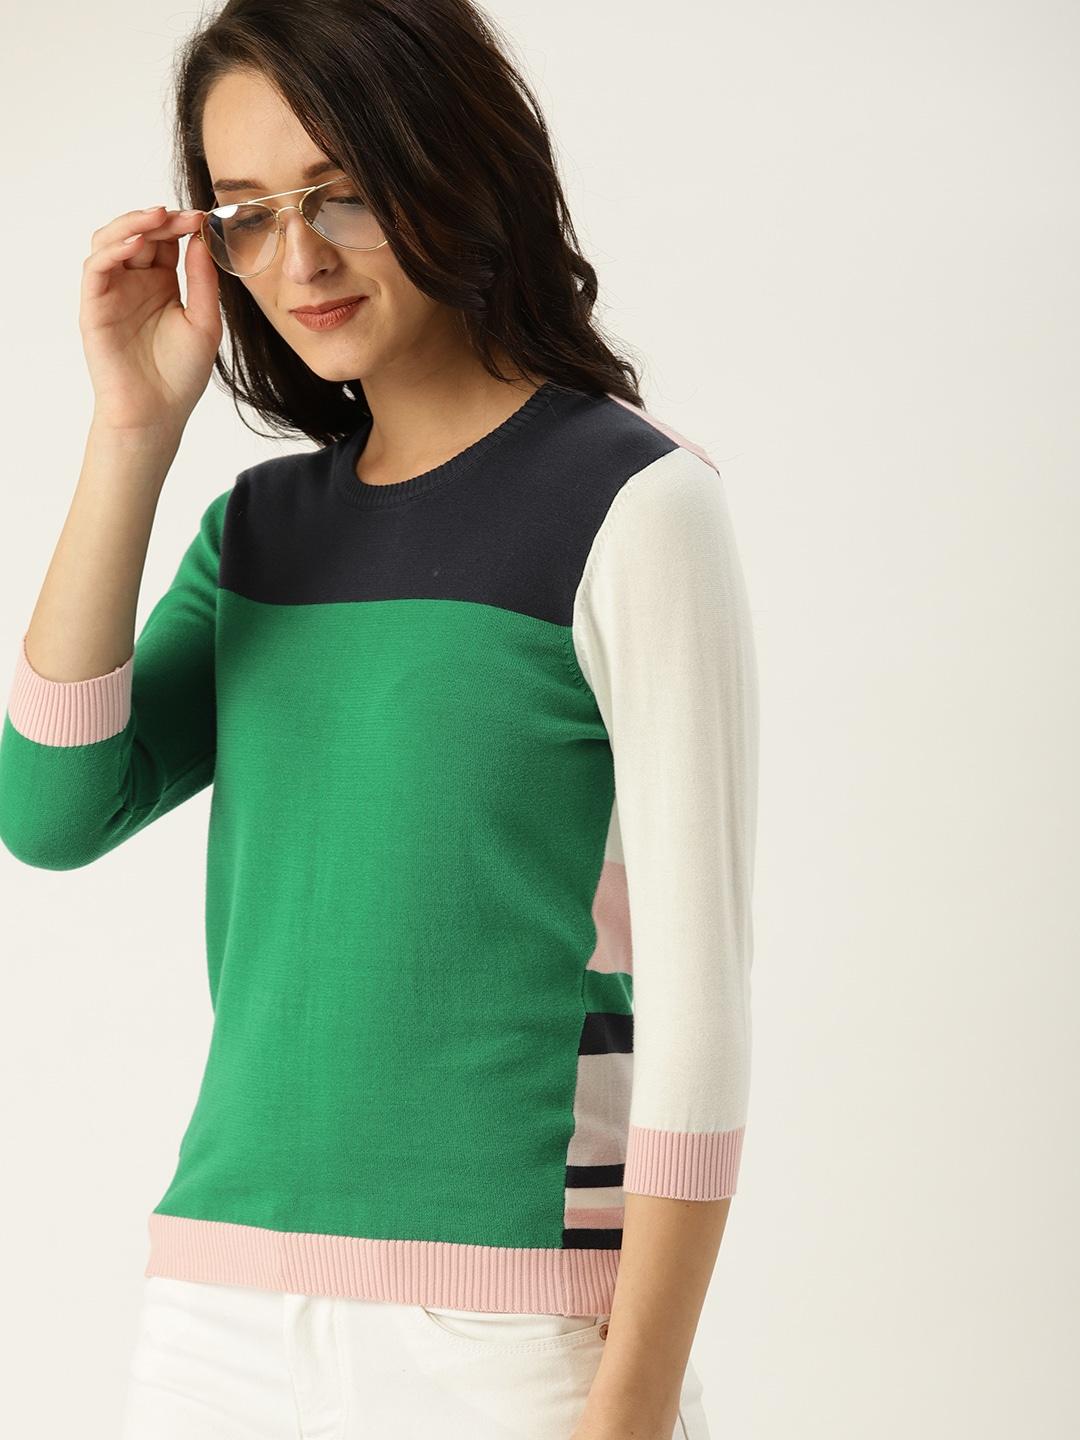 united colors of benetton women green & white striped pullover sweater